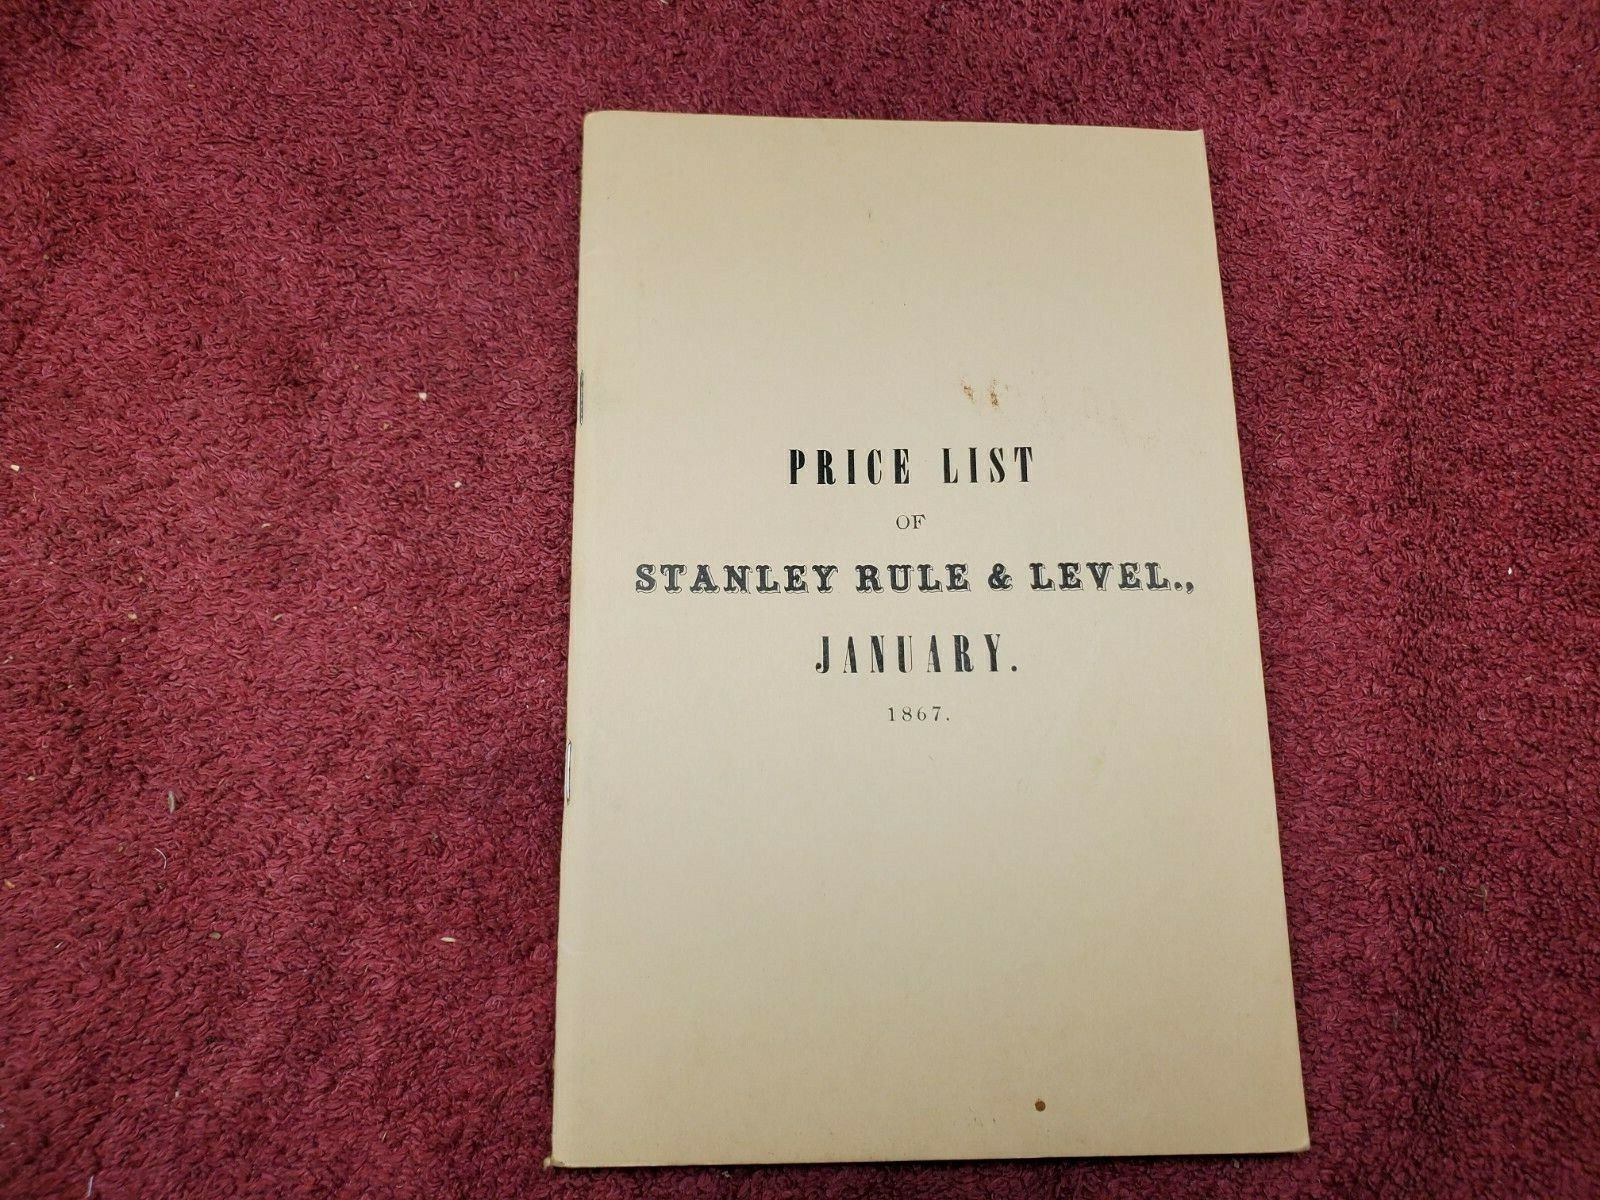 Reprint of January 1867 Stanley Rule & Level Price List 